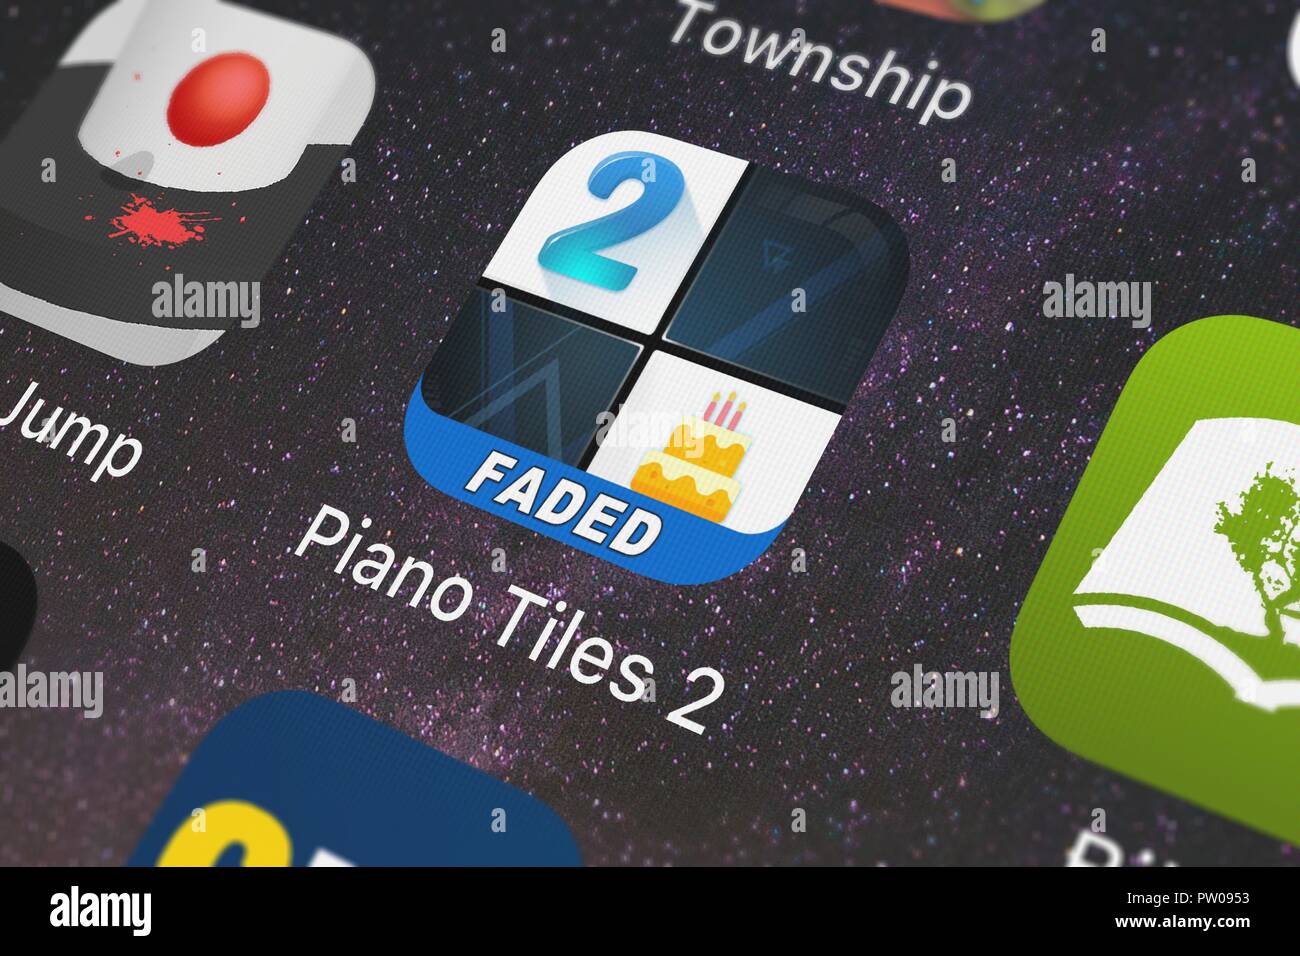 London, United Kingdom - October 11, 2018: The Piano Tiles 2™ mobile app  from Cheetah Technology Corporation Limited on an iPhone screen Stock Photo  - Alamy